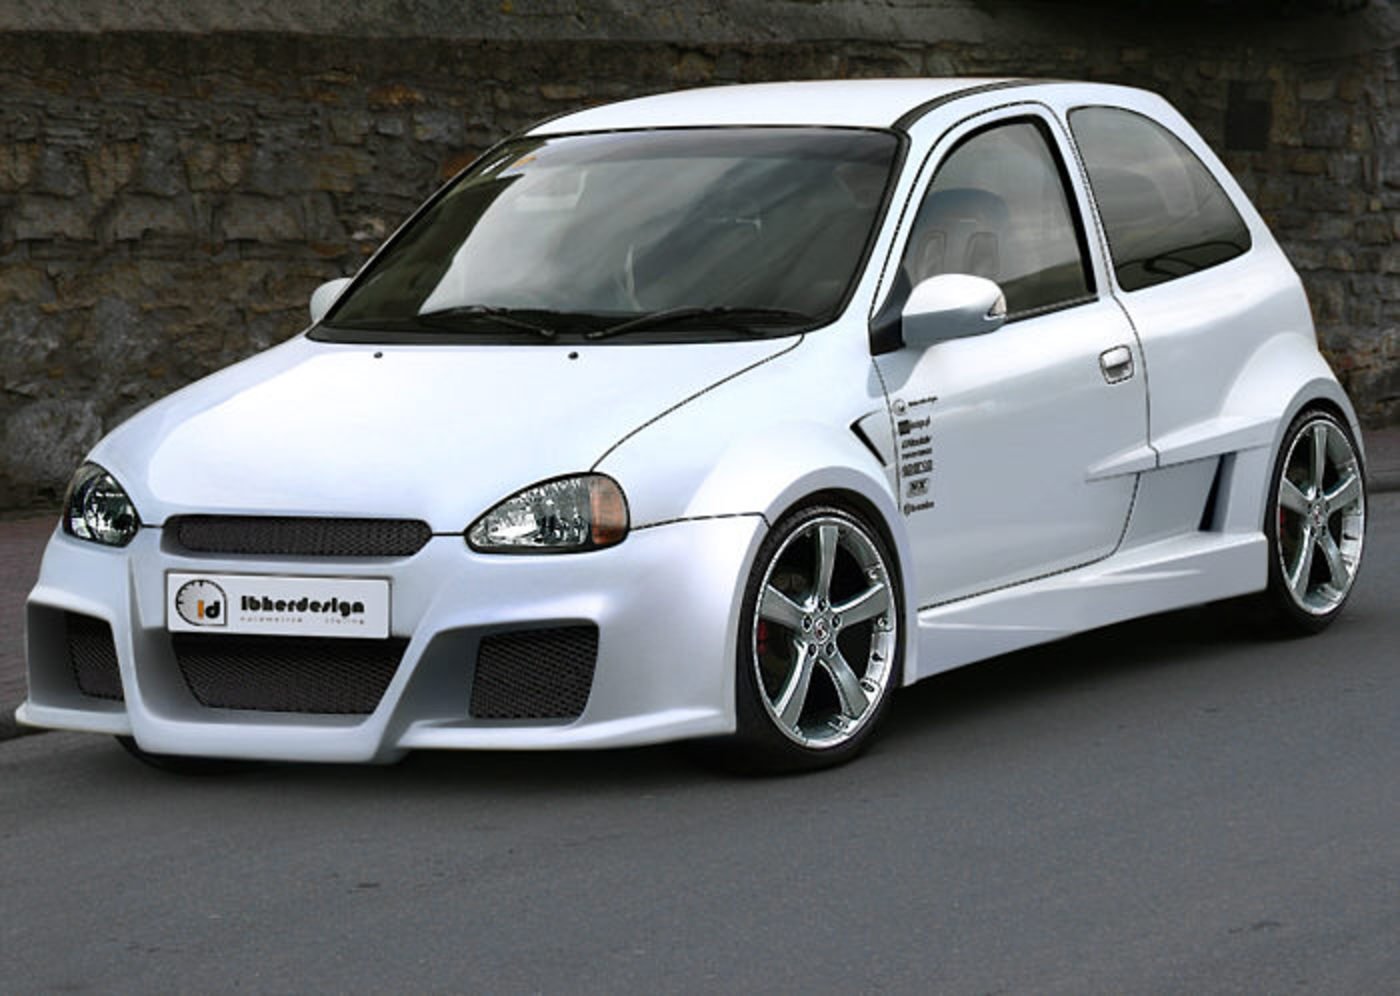 Vauxhall Corsa B. View Download Wallpaper. 700x498. Comments